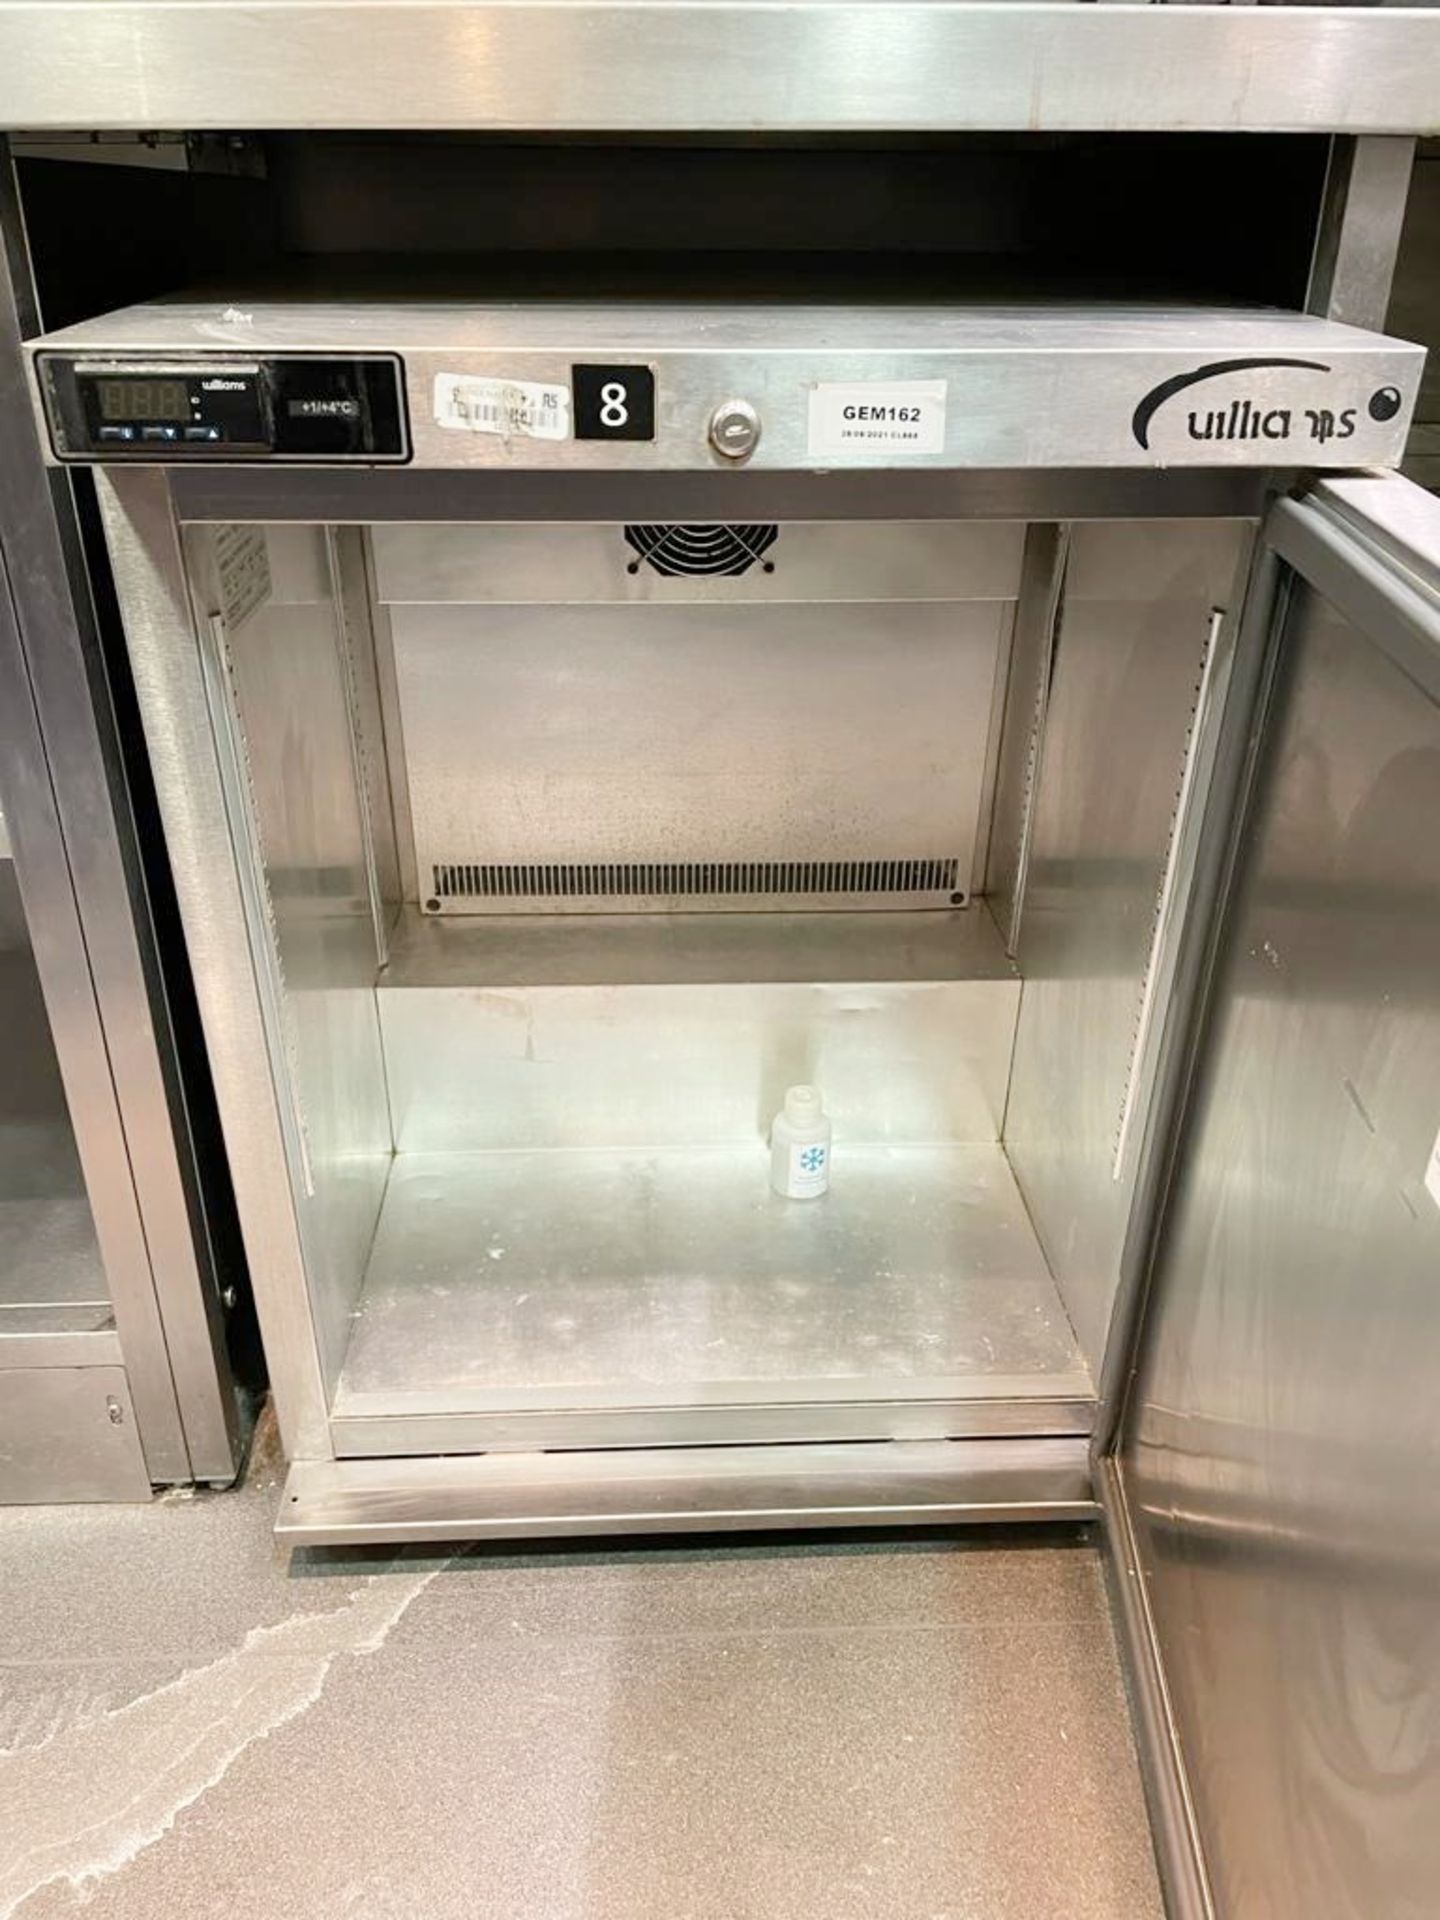 1 x Williams HA134SA Undercounter Refrigerator With Stainless Steel Exterior - CL670 - Ref: GEM162 - - Image 5 of 5